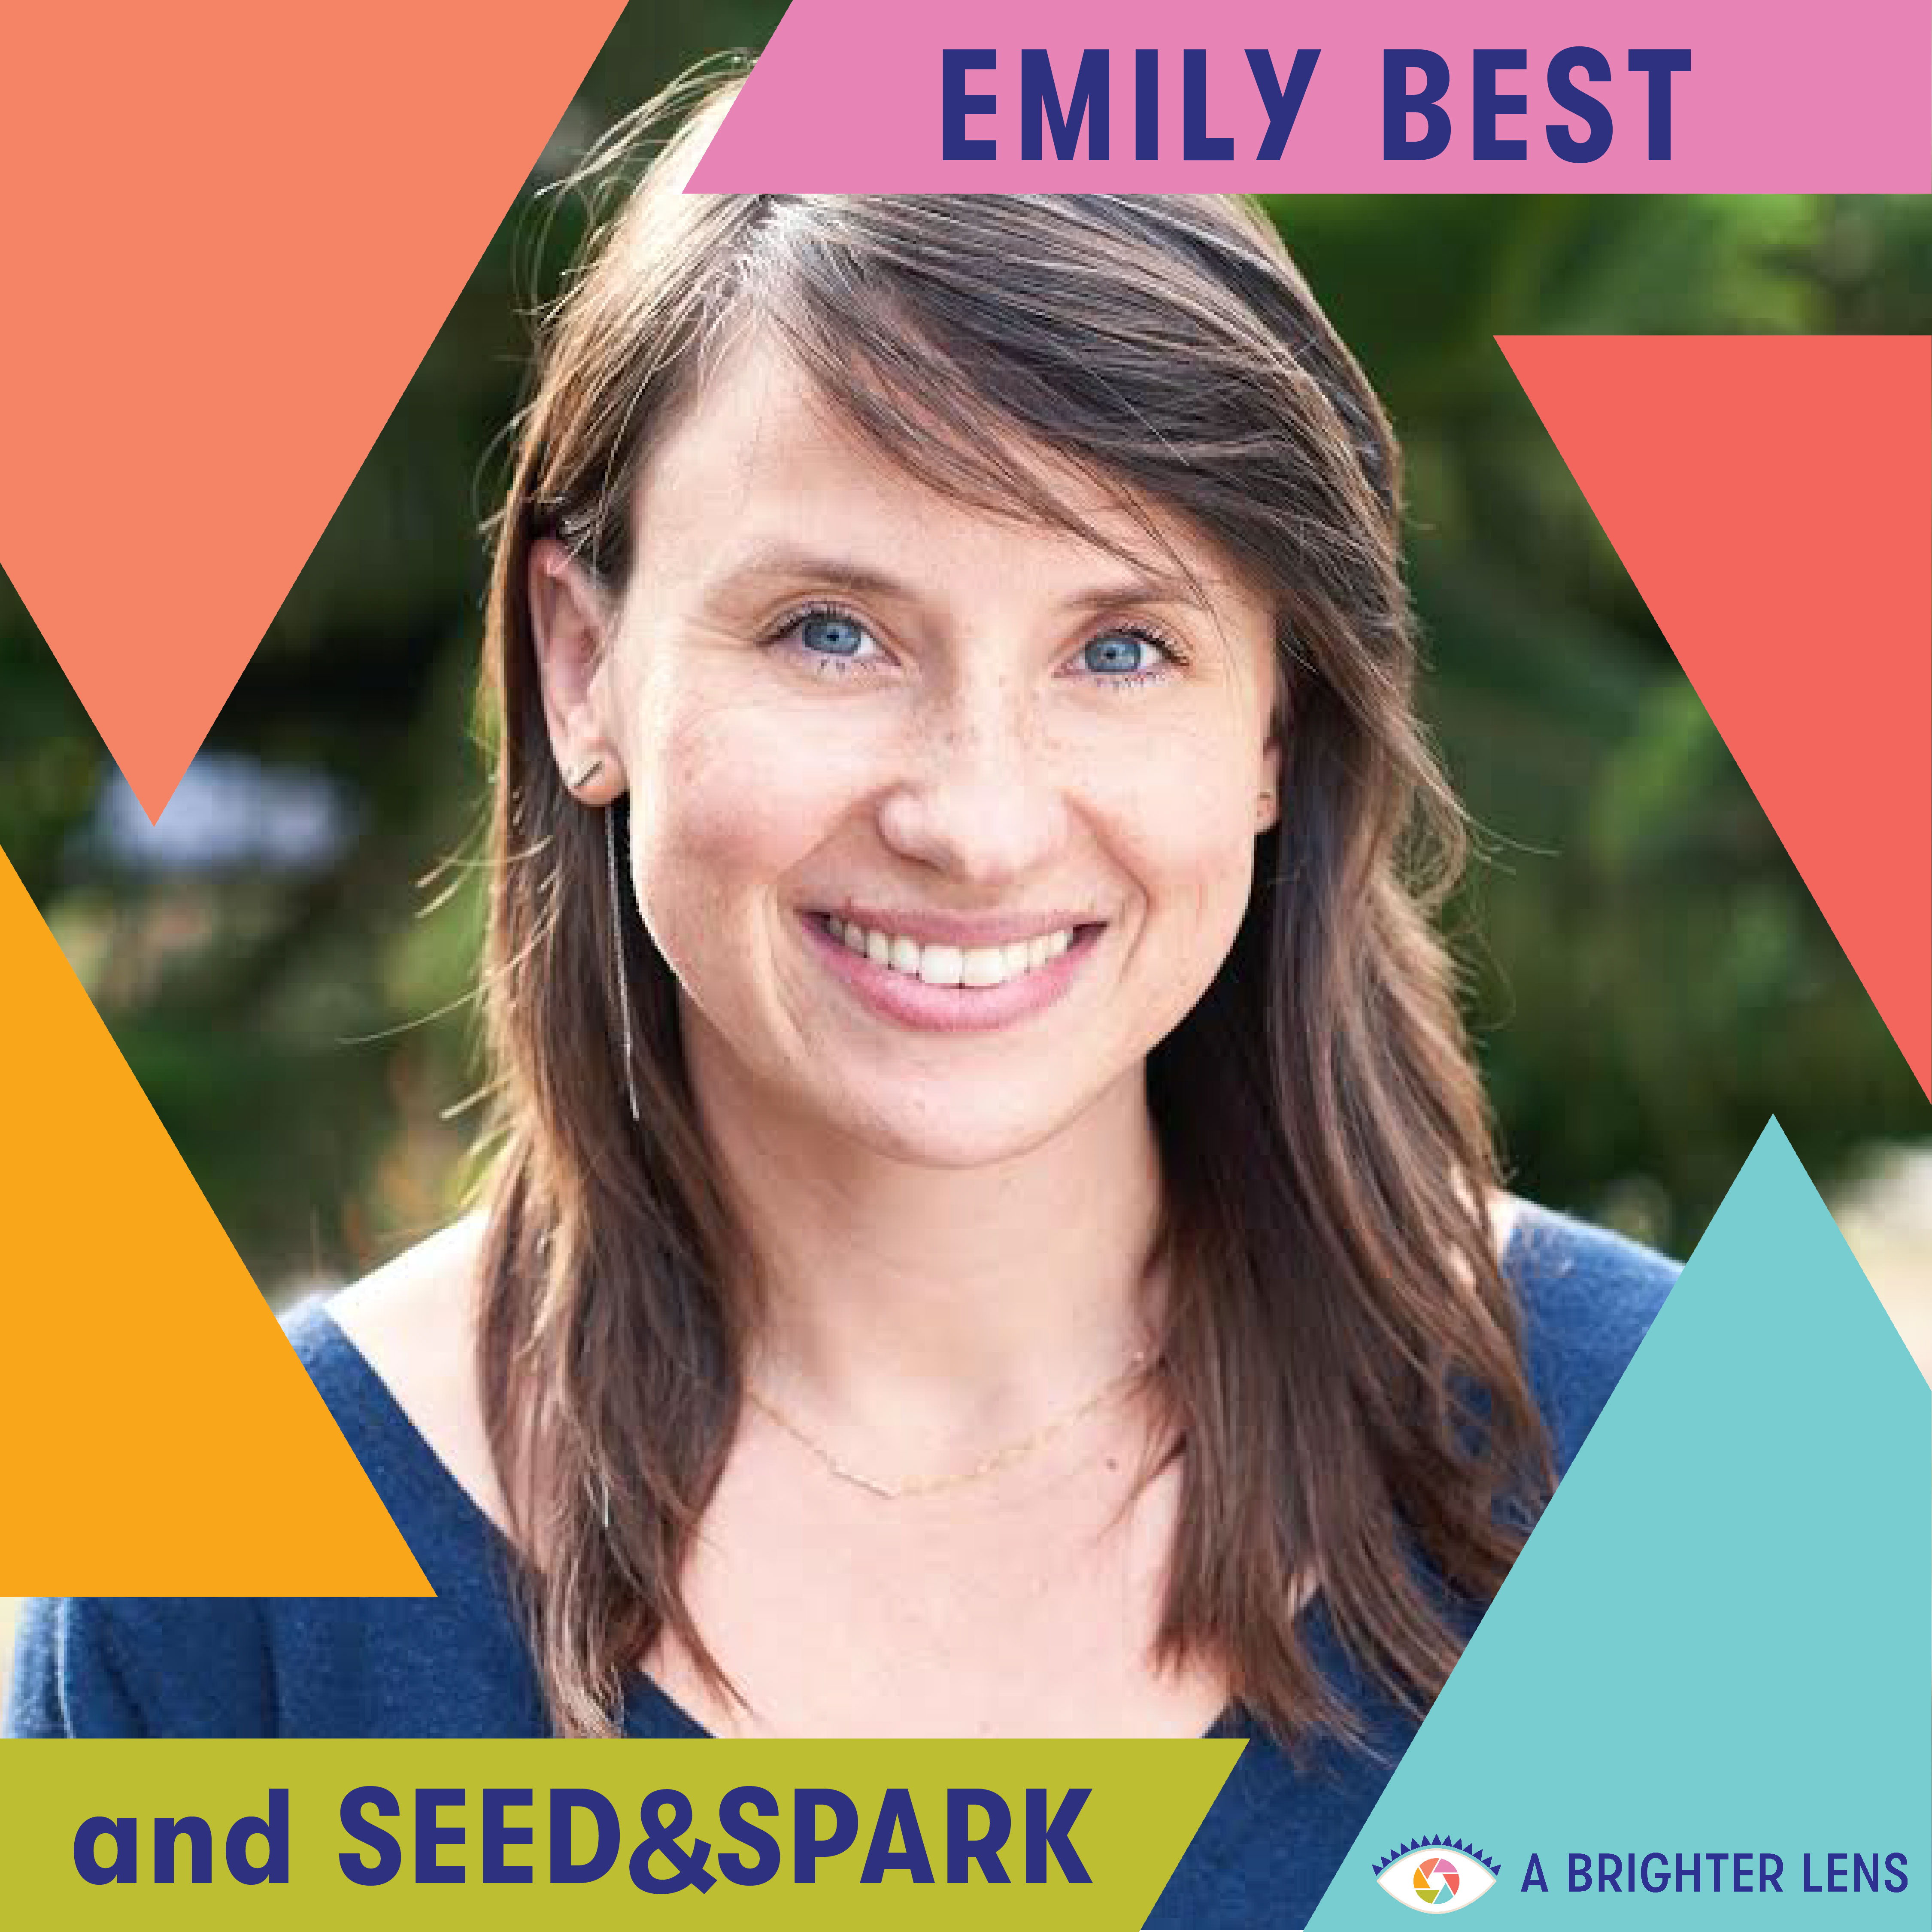 Emily Best and Seed&Spark